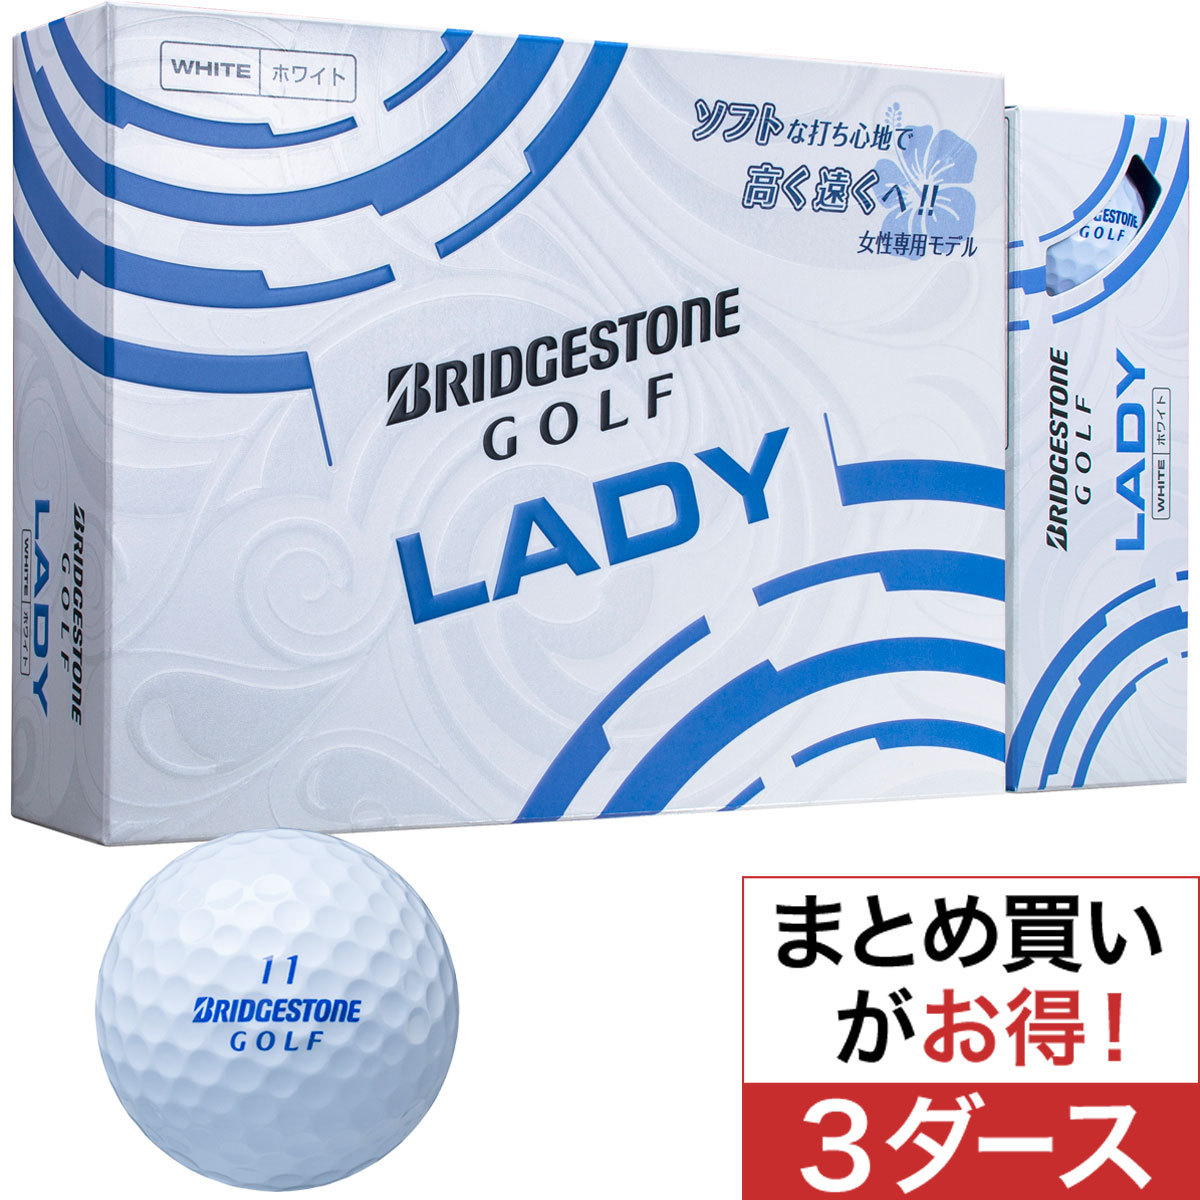  LADYボール 3ダースセット レディス